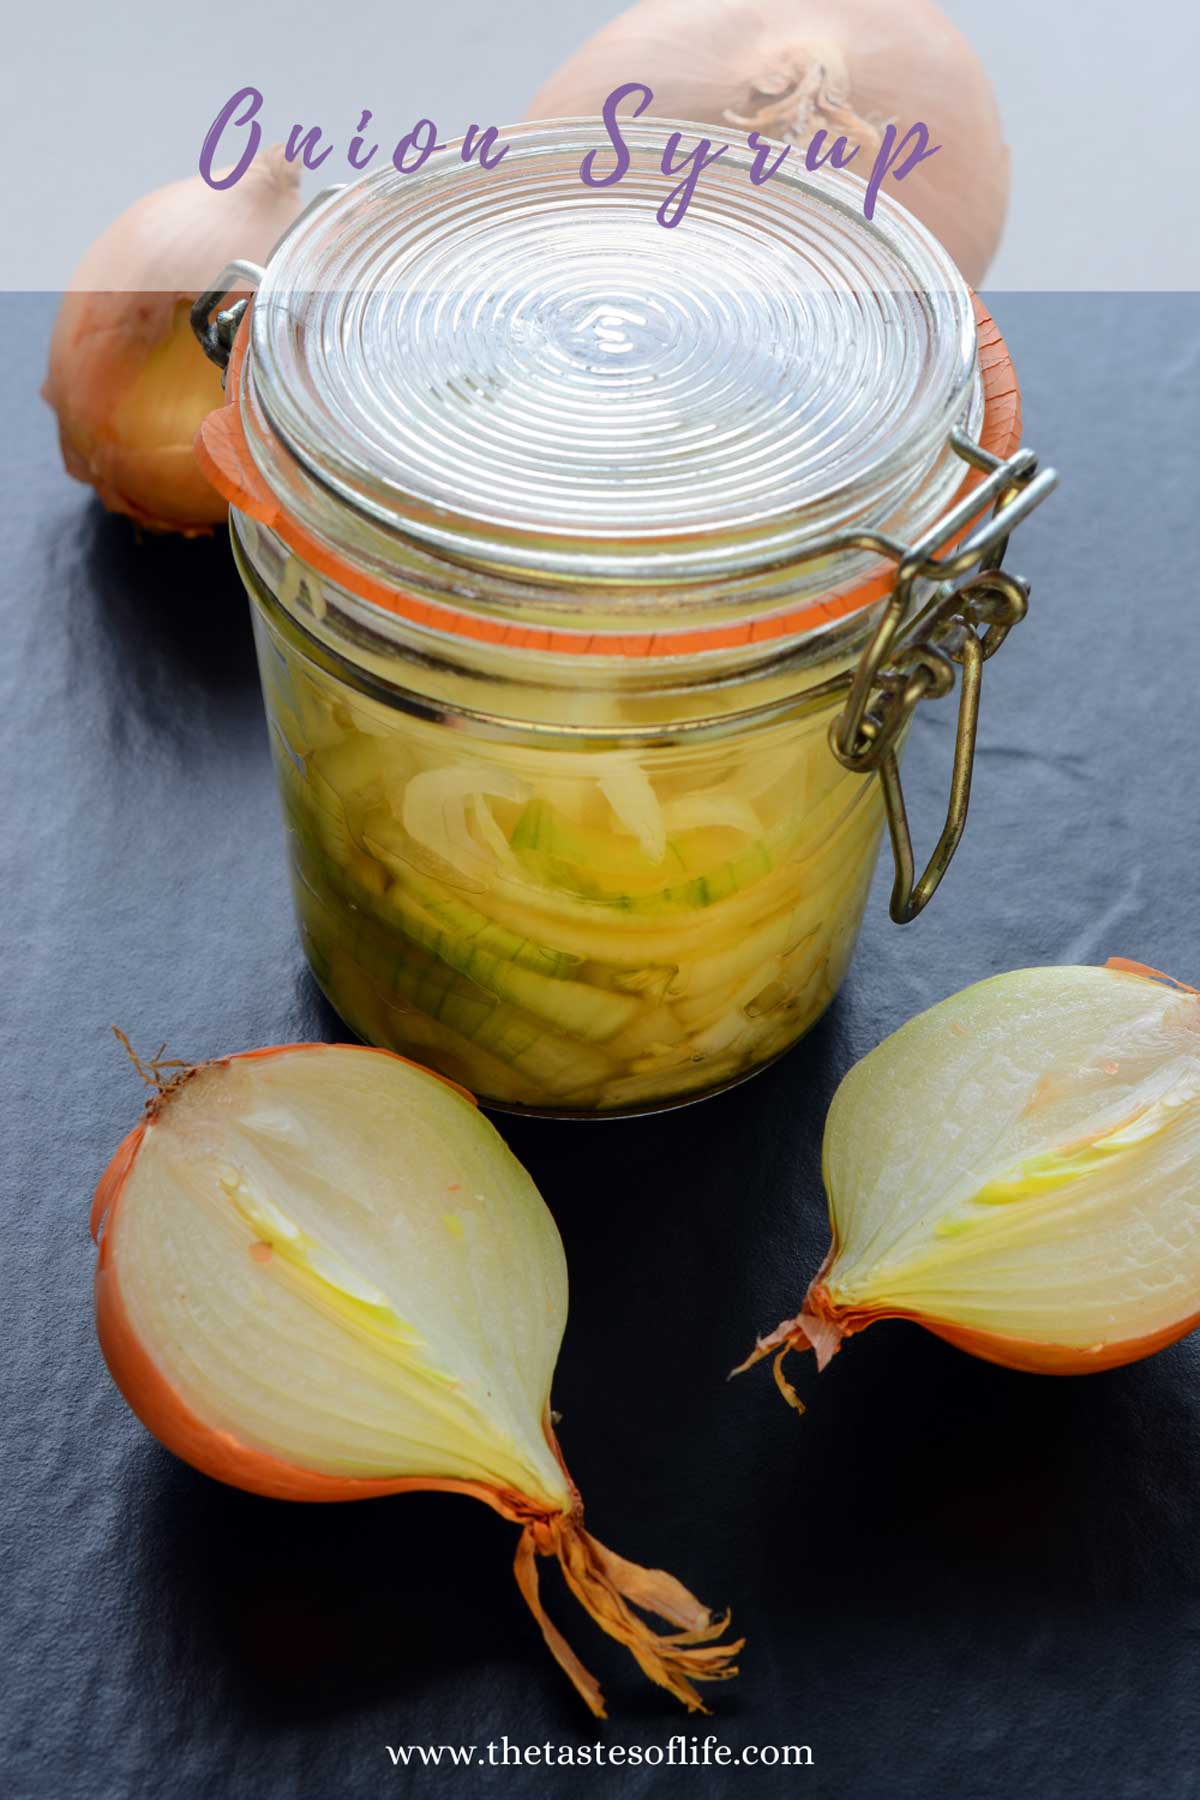 The Healing Power of Onion Syrup: A Natural Remedy for Colds and Flu.